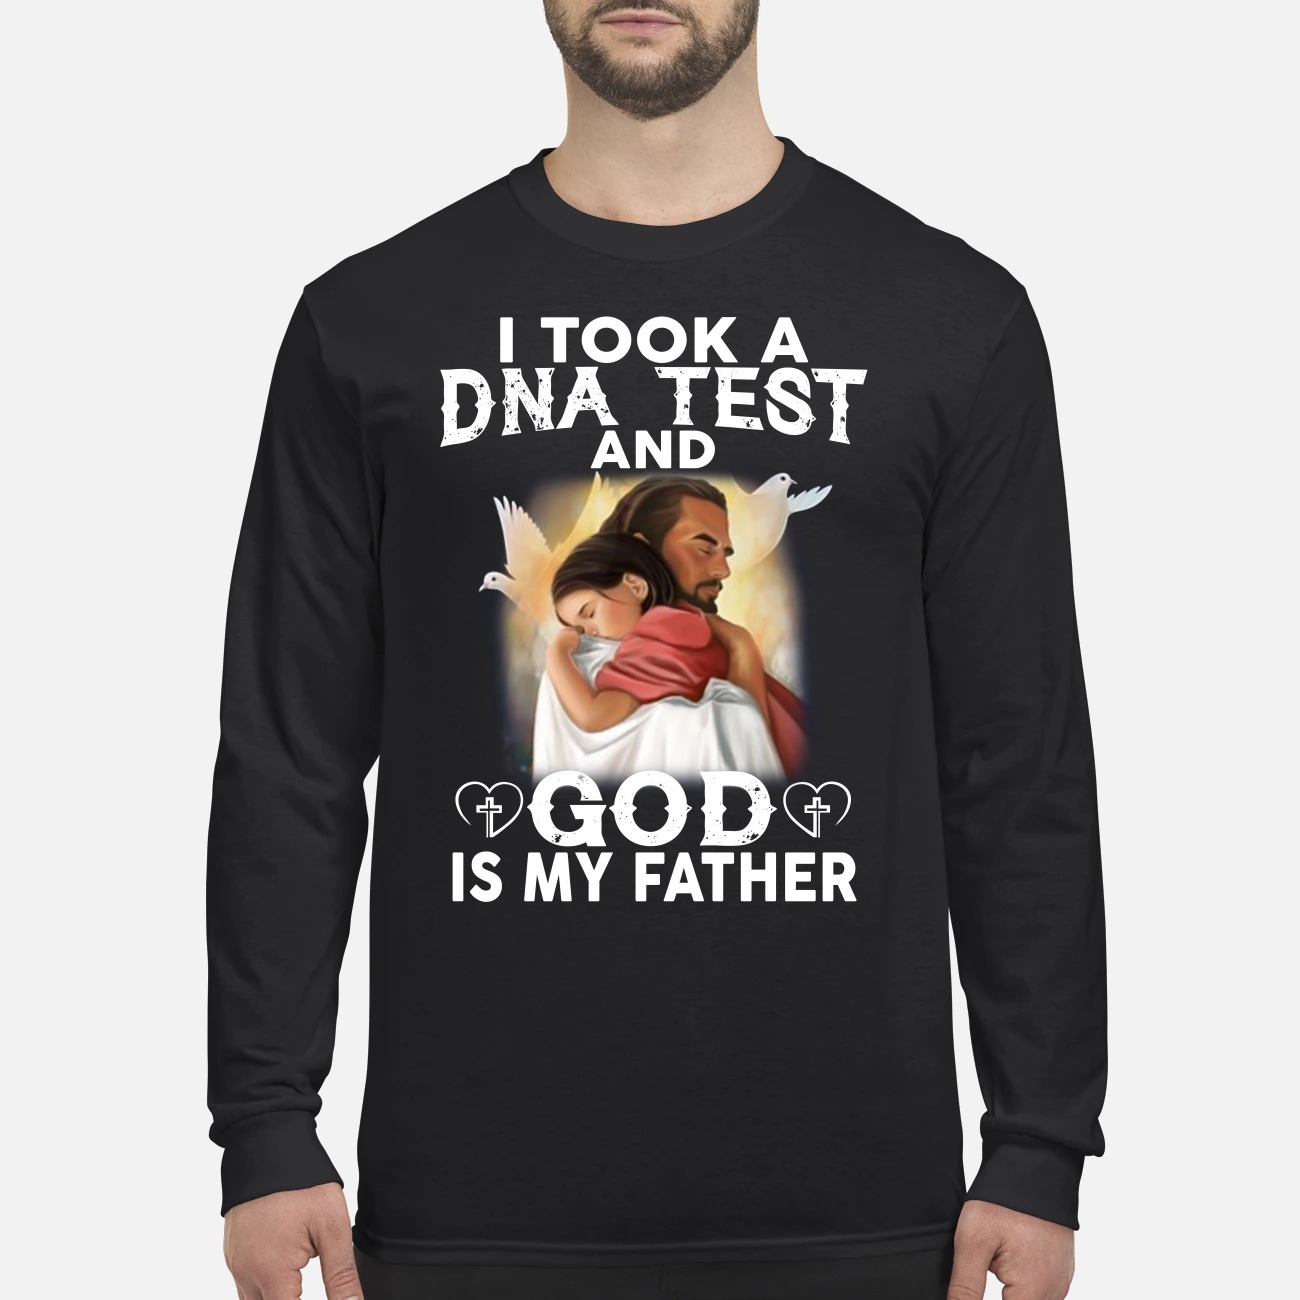 I took a DNA test and God is my father men's long sleeved shirt